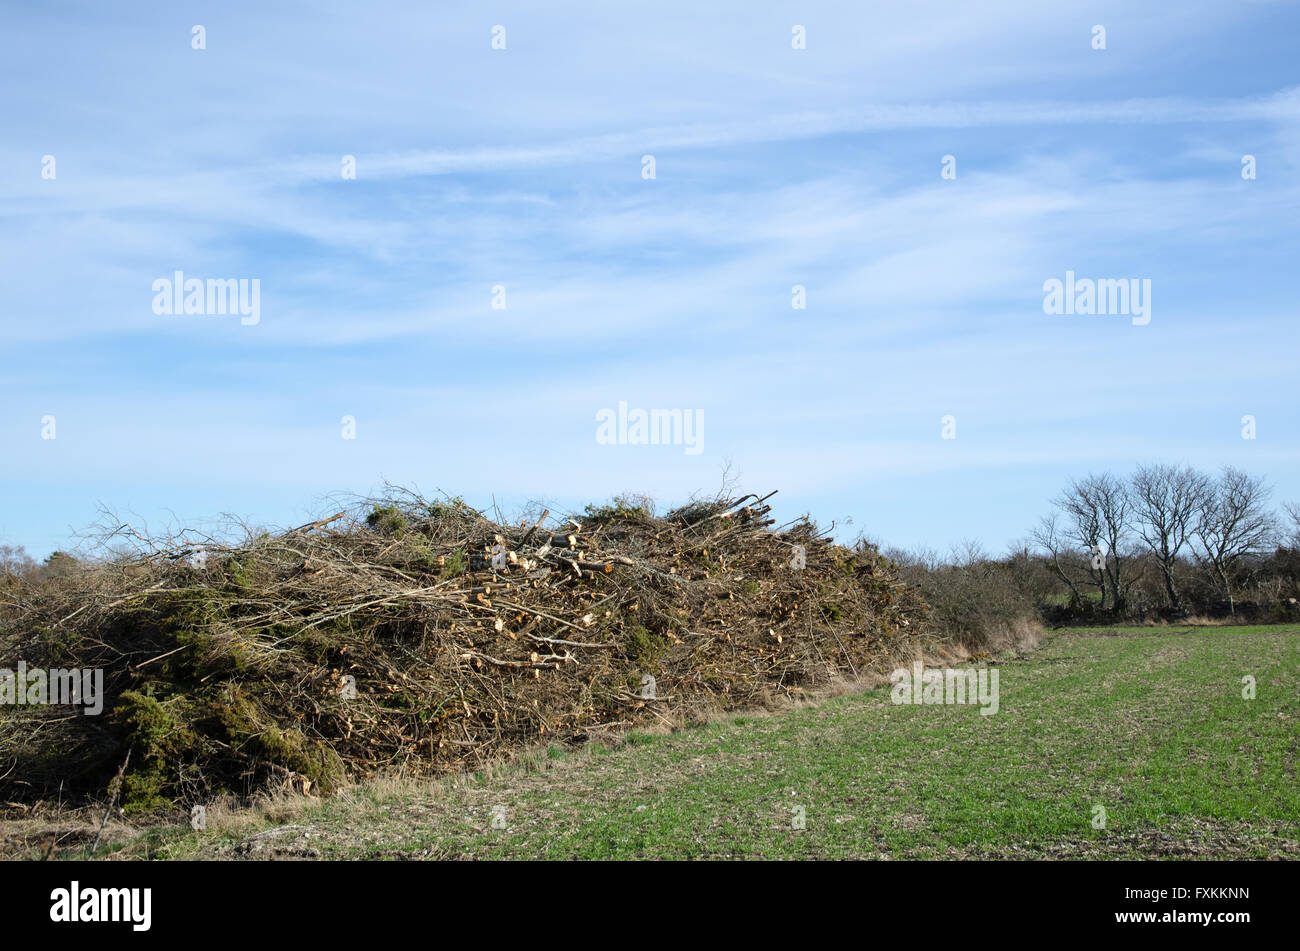 Wood pile of branches ready for chipping to biomass energy Stock Photo